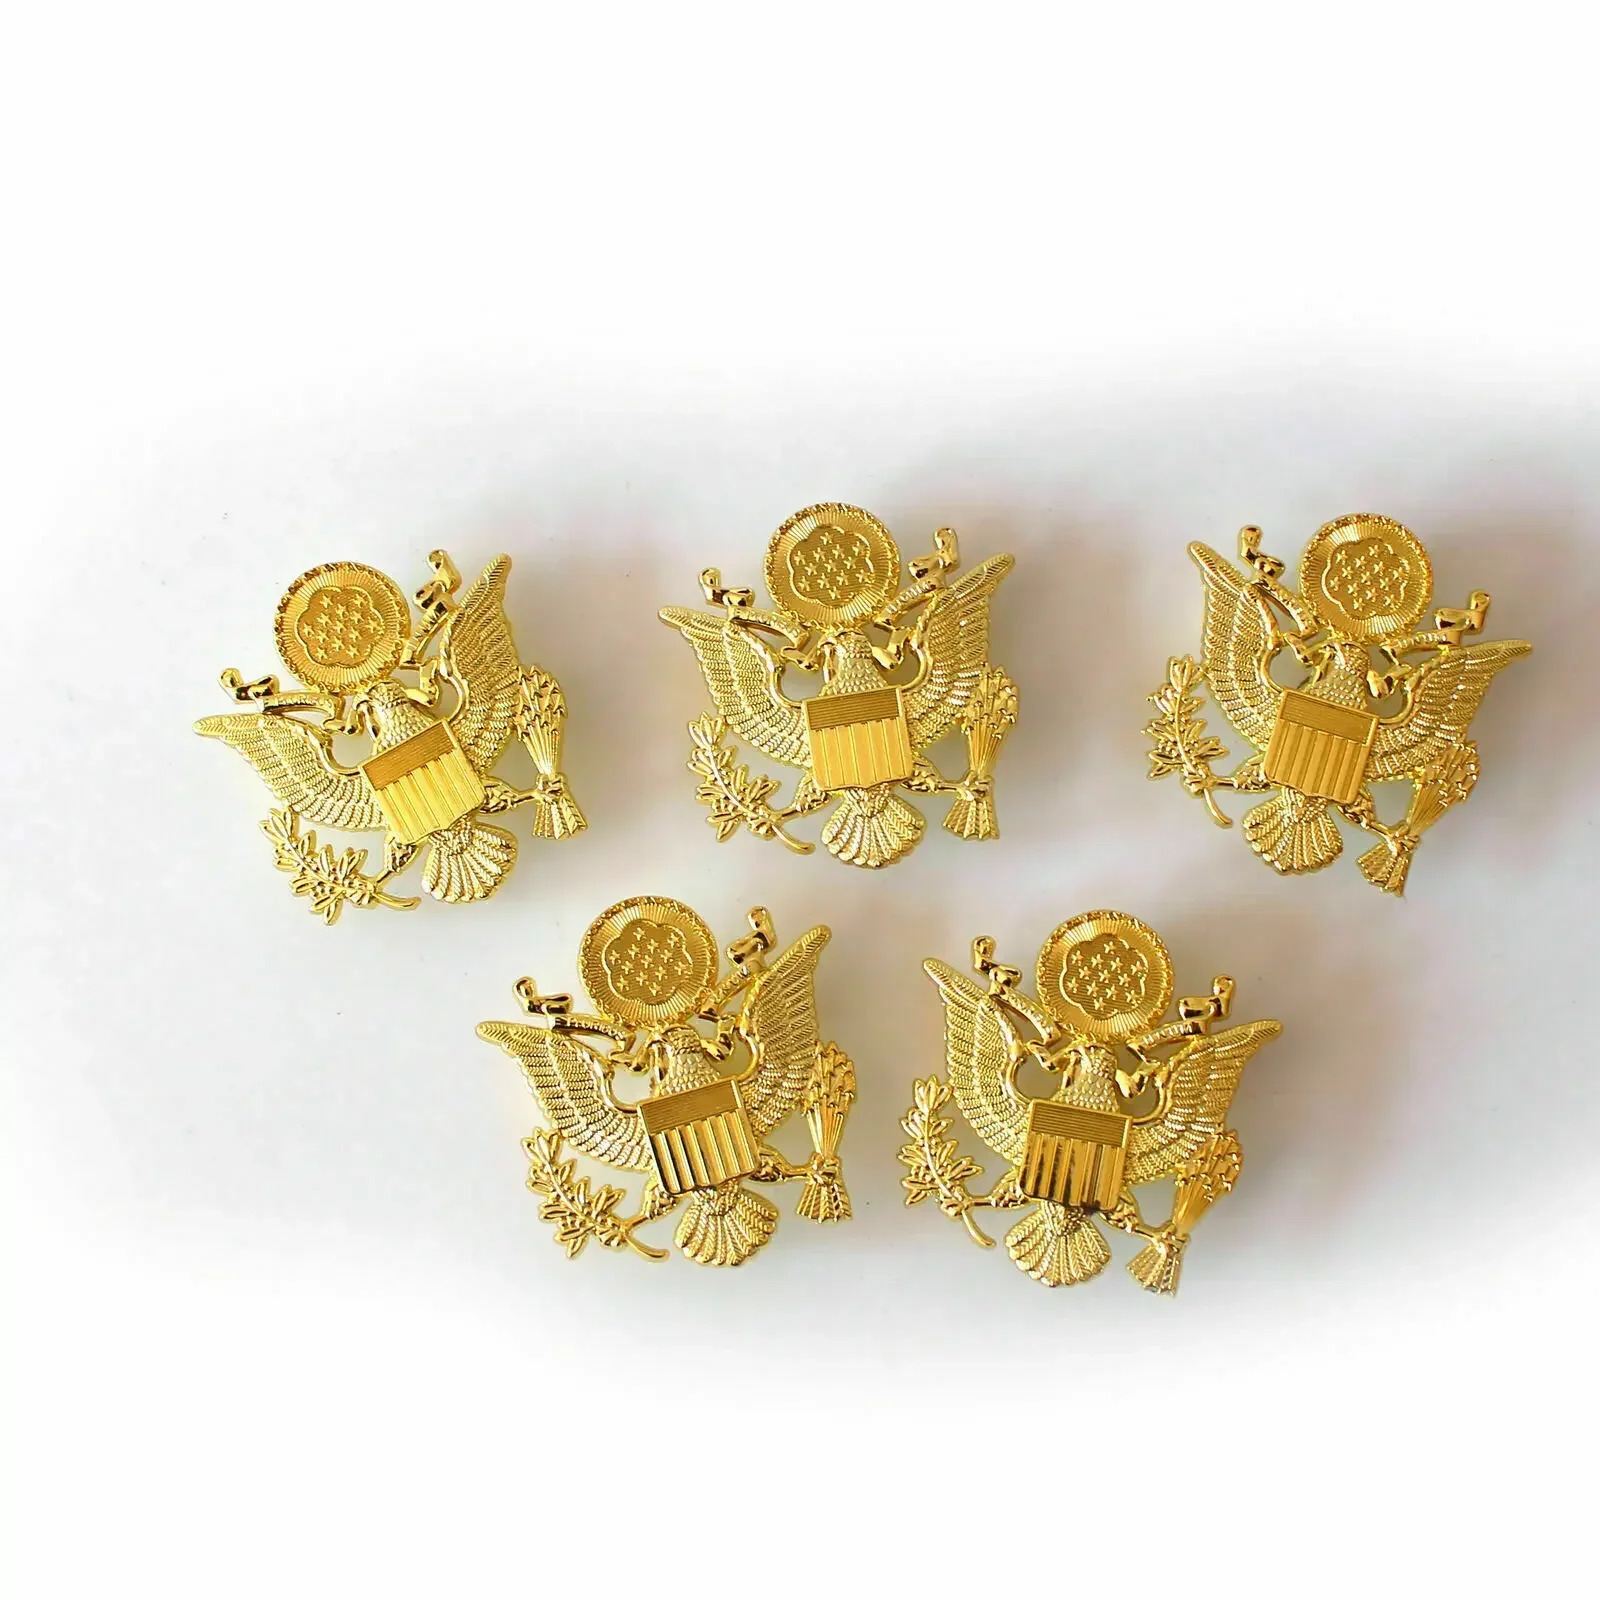 5PCS/LOT US ARMY OFFICER CAP EAGLE BADGE GOLD INSIGNIA REGULATION SIZE